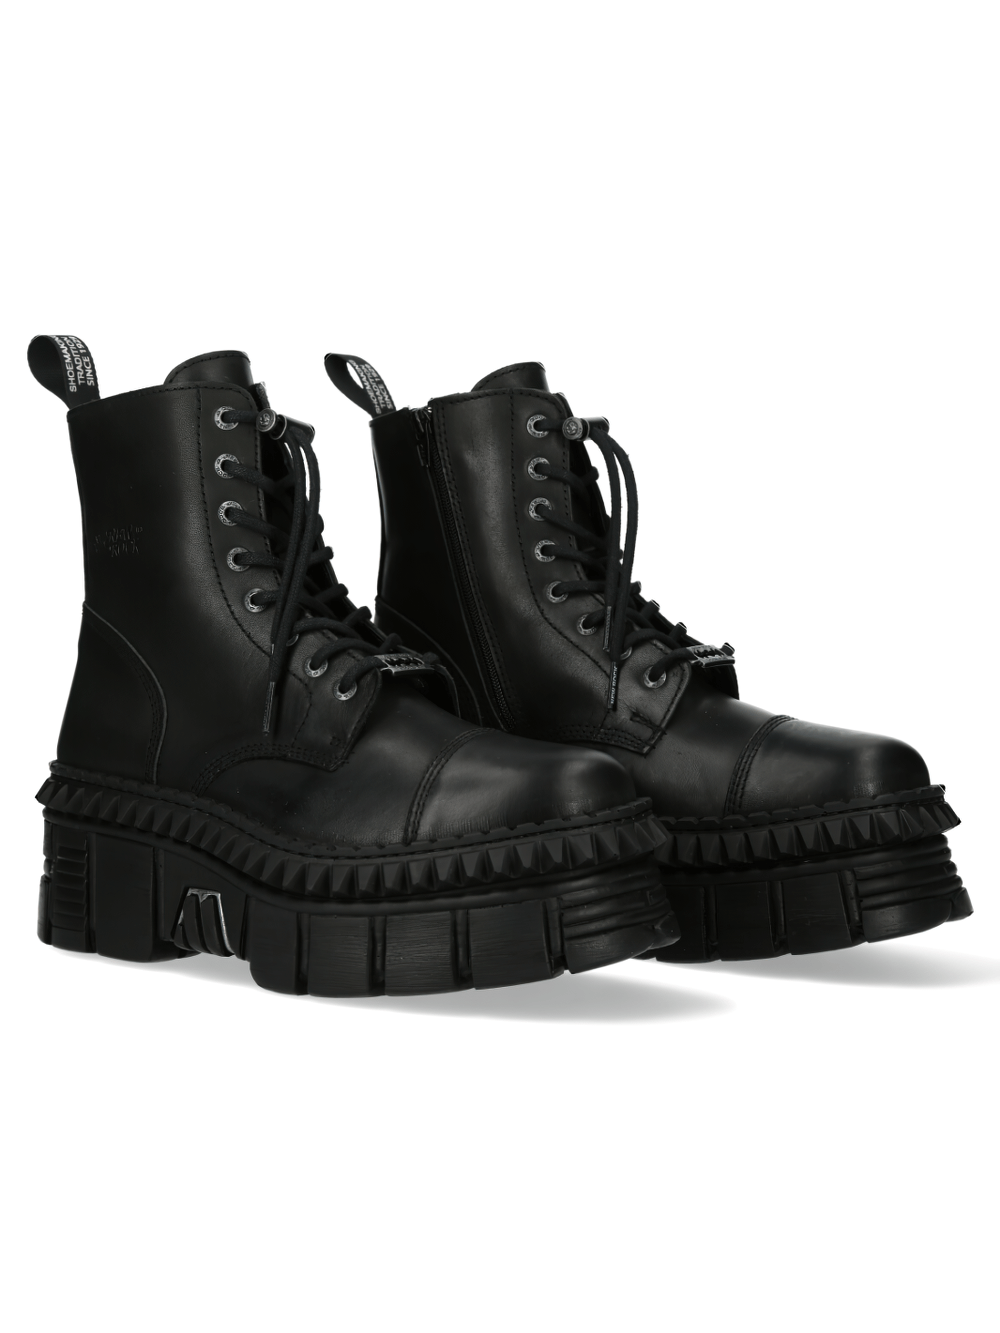 NEW ROCK Black Military Unisex Ankle Boots with Platforms